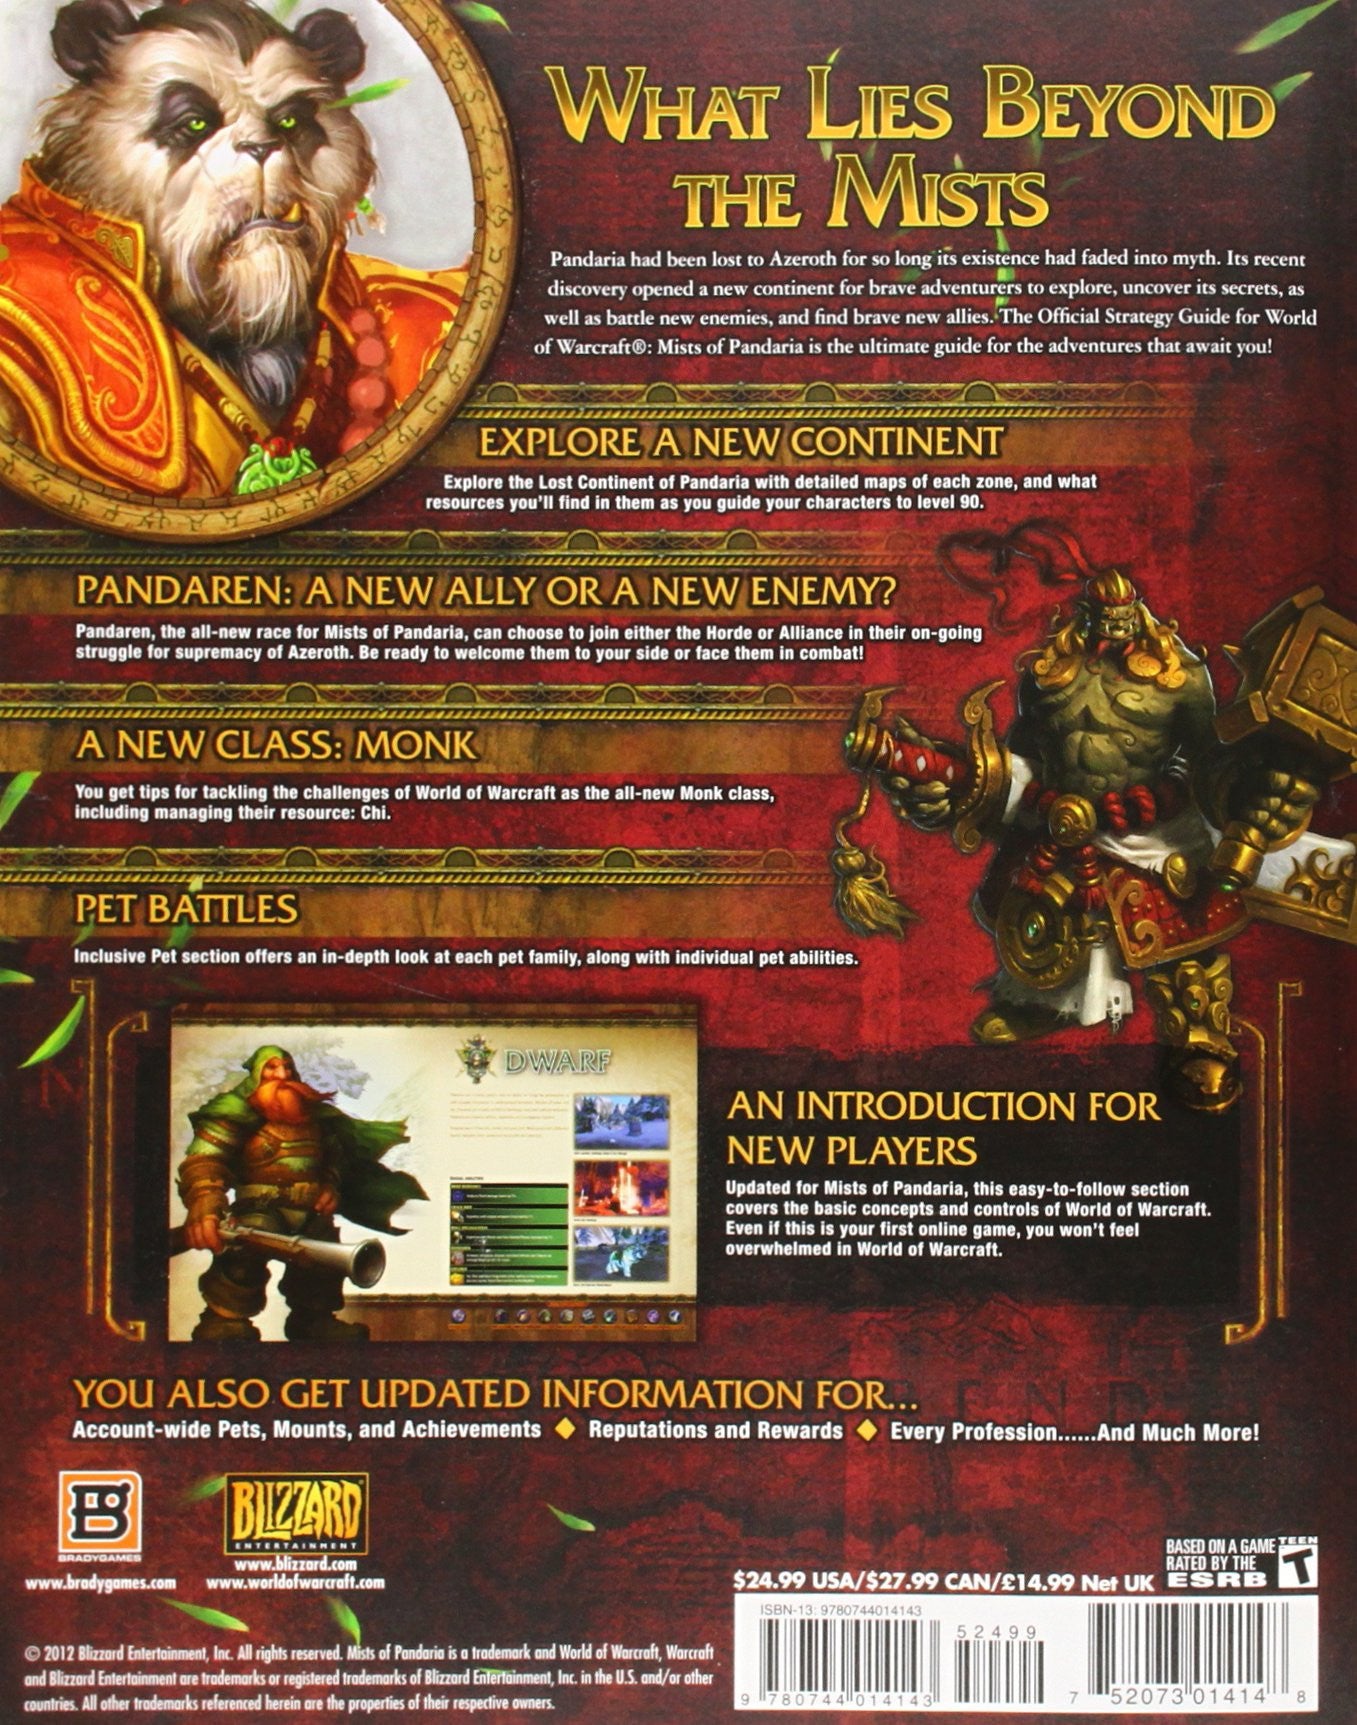 World of Warcraft: Mists of Pandaria Signature Series Guide (Bradygames